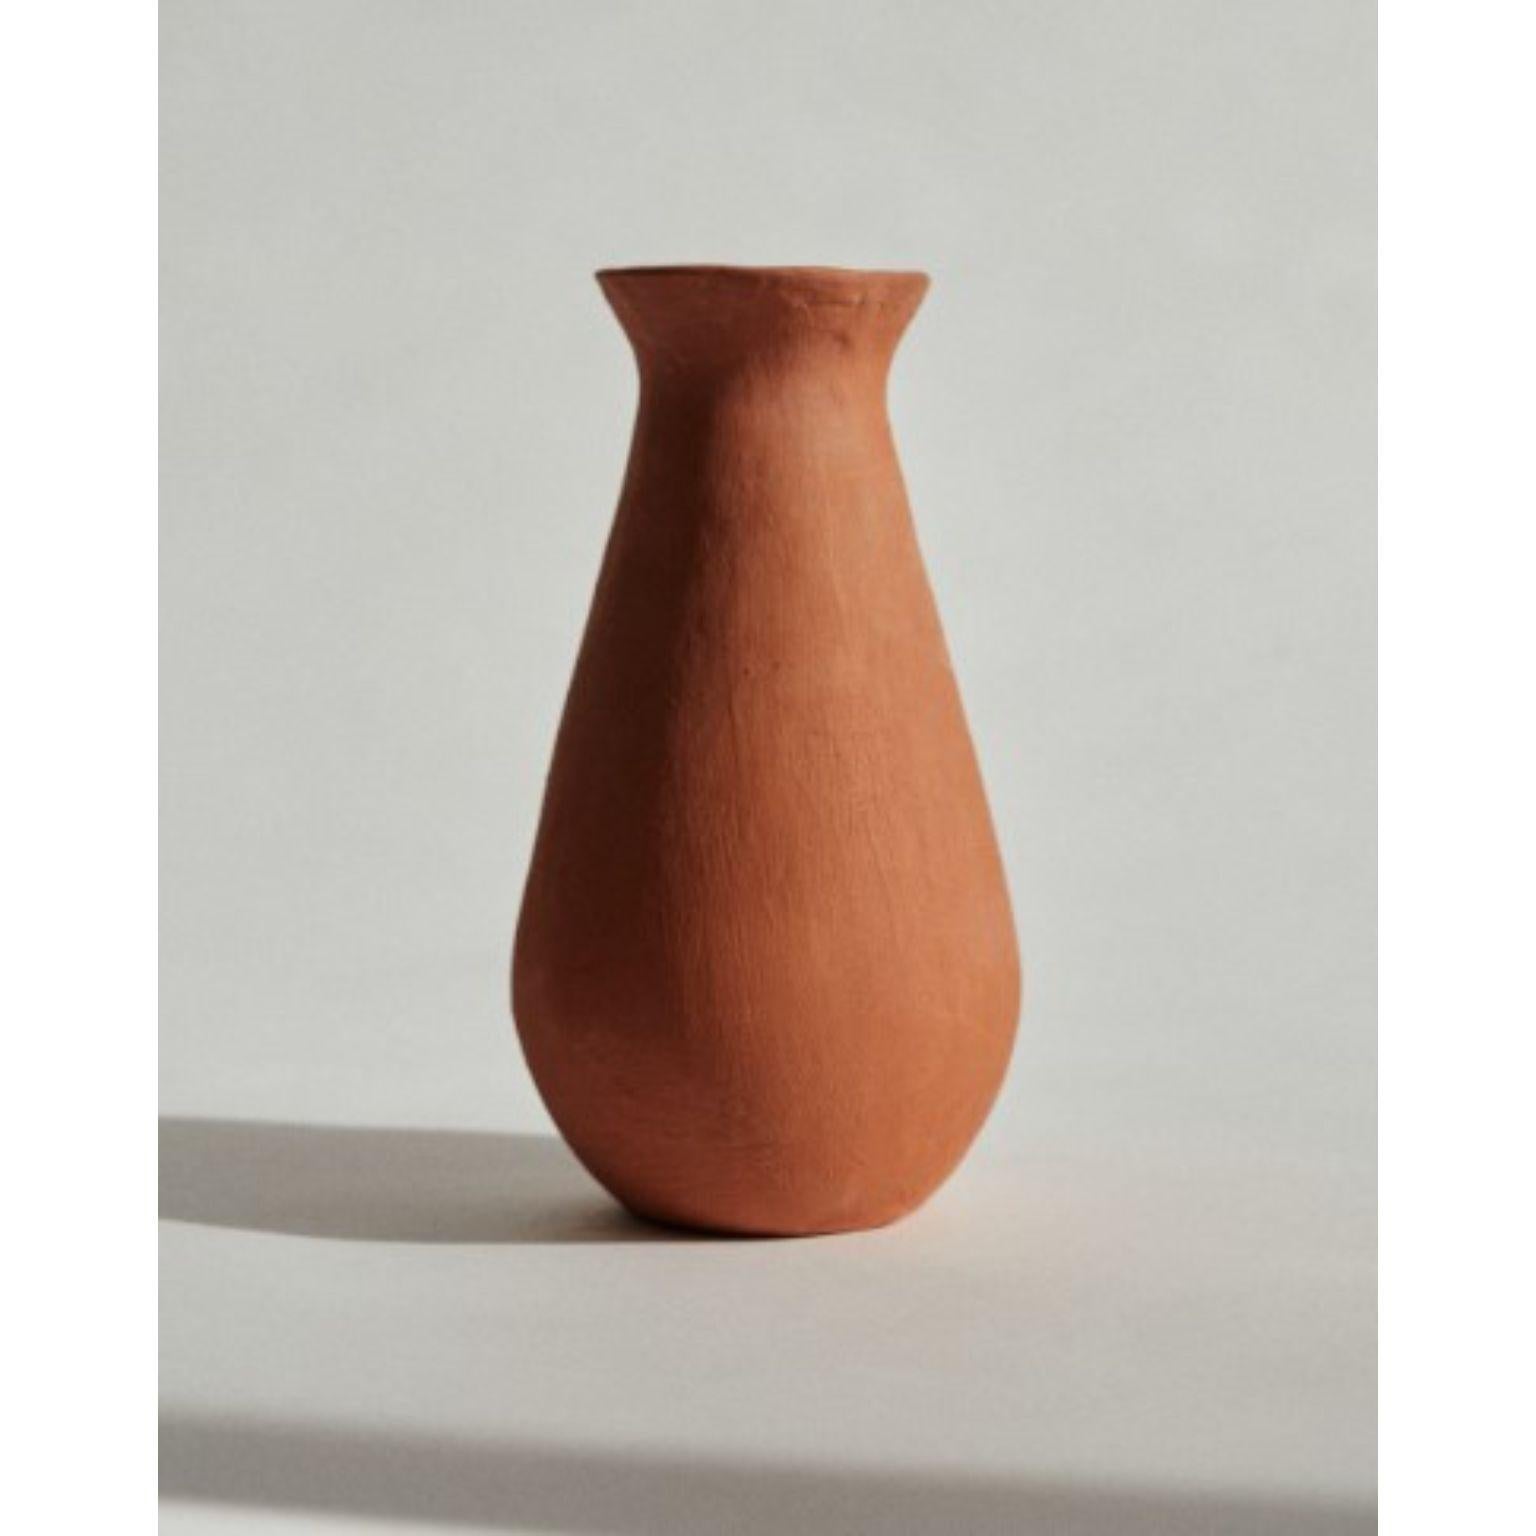 Pitcher of water in Terracota by Marta Bonilla
Dimensions: D 8 x H 24 cm
Materials: Terracotta, Clay

Pitcher of water in terracotta: Water jug modeled by hand enameled inside.

Marta Bonilla designs and creates her pieces in Barcelona, where